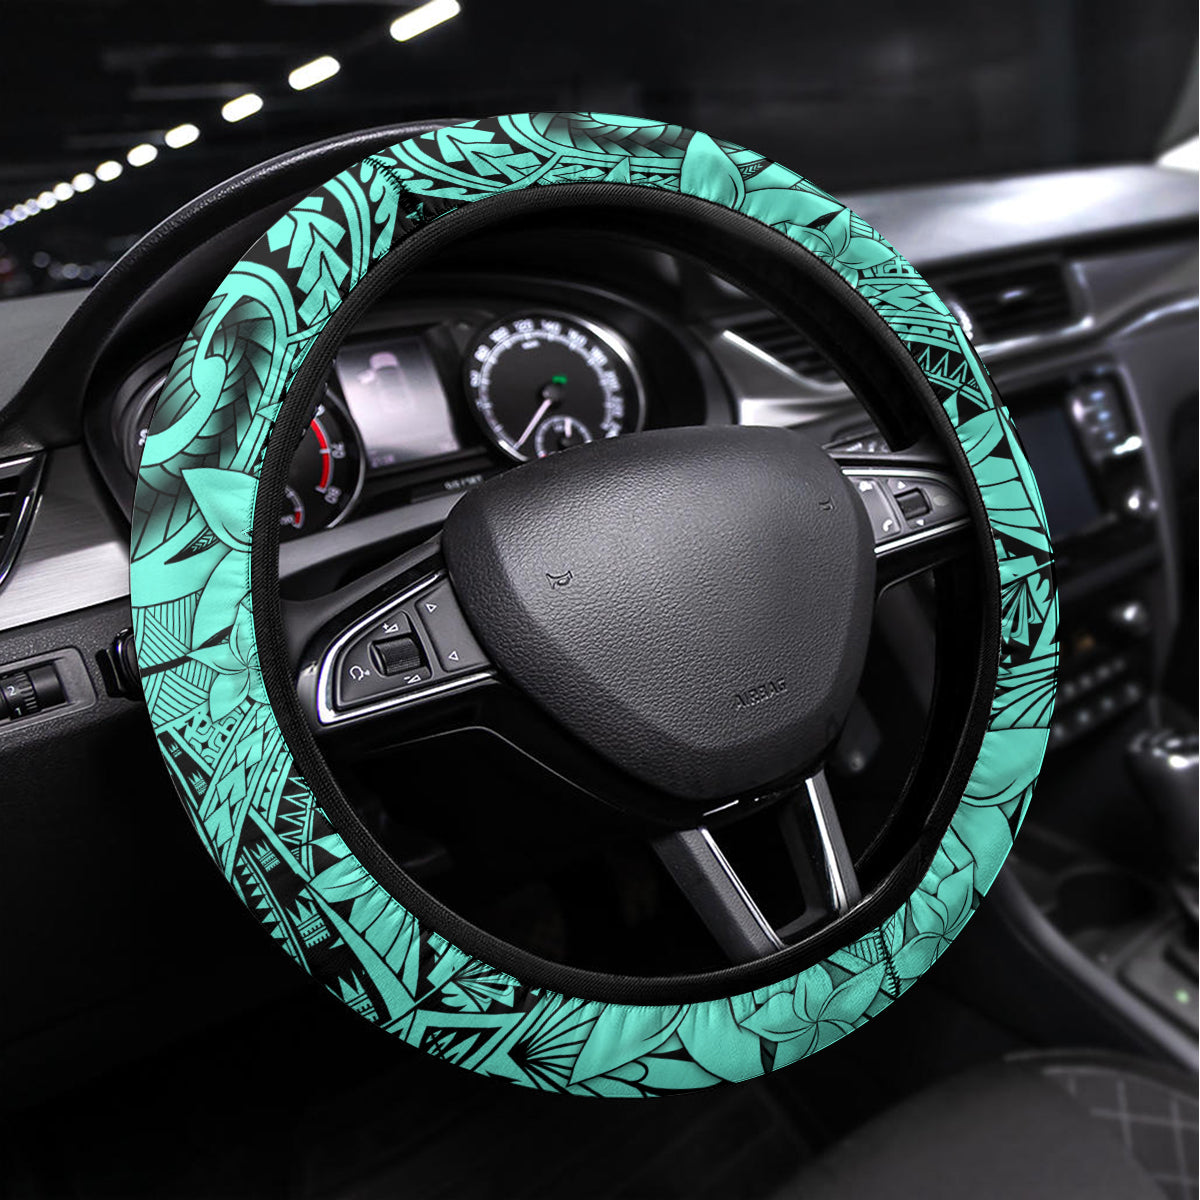 Polynesia Steering Wheel Cover Tribal Polynesian Spirit With Teal Pacific Flowers LT9 Universal Fit Teal - Polynesian Pride